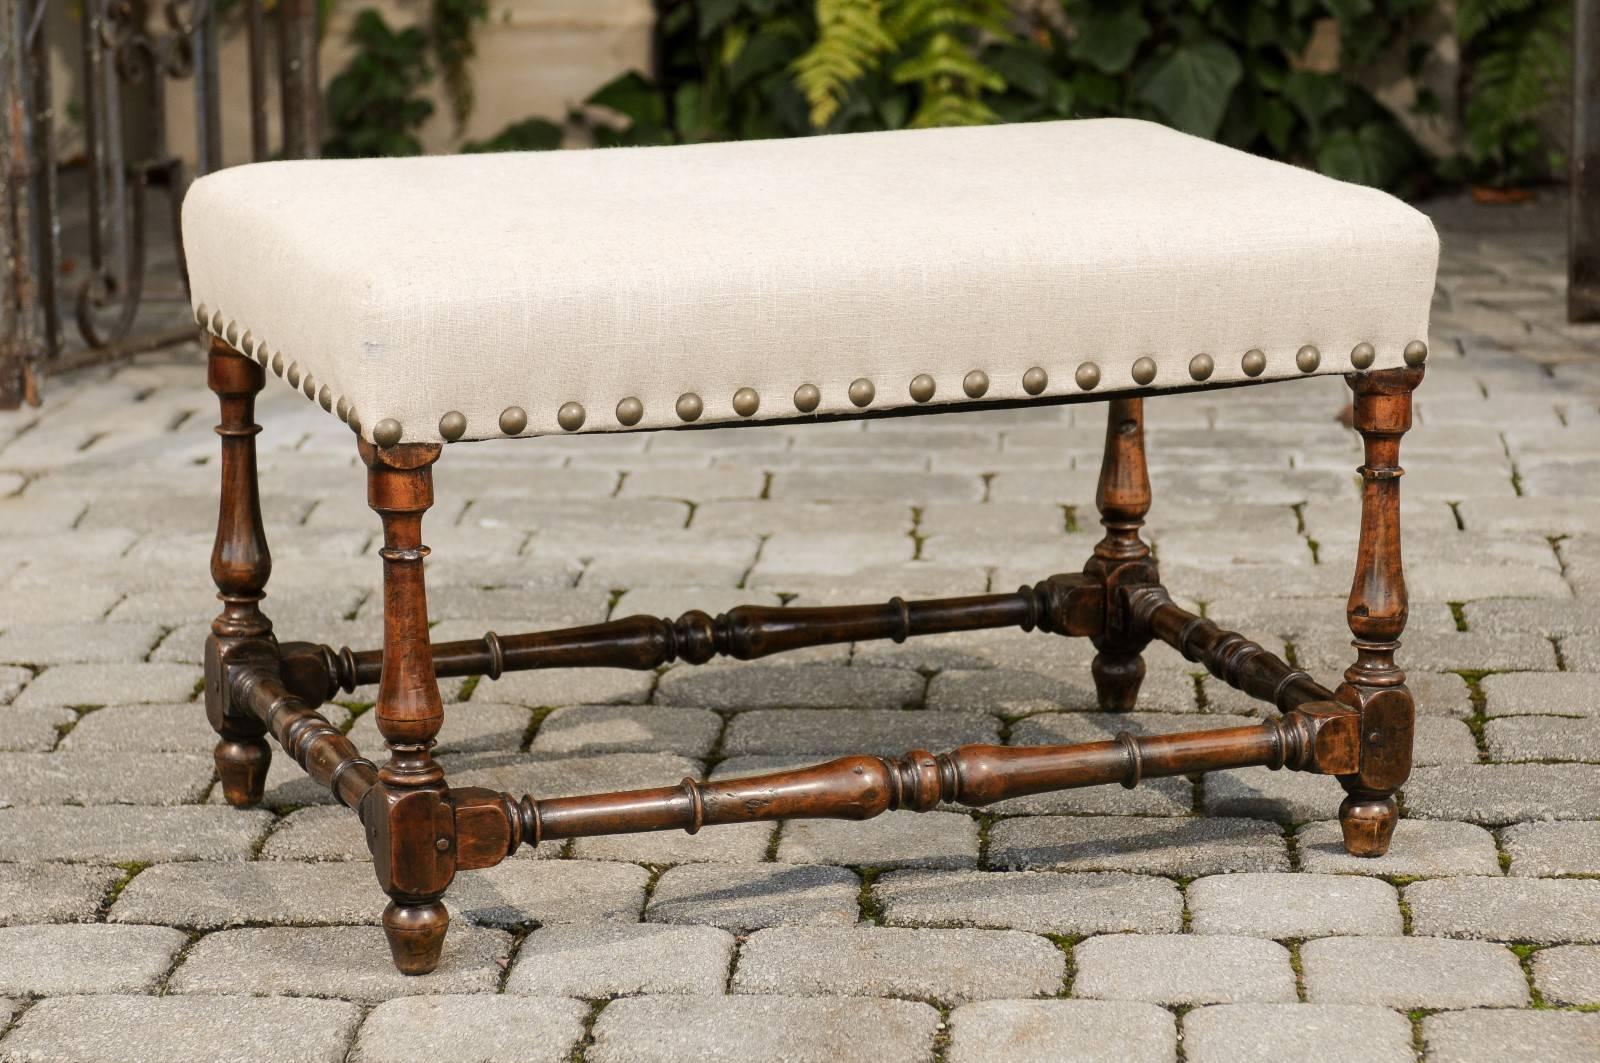 An Italian wooden upholstered bench with turned baluster legs and spindle-shaped side stretchers from the 18th century. This Italian bench features a rectangular linen-upholstered seat with brass nailhead trim, raised on four exquisite baluster